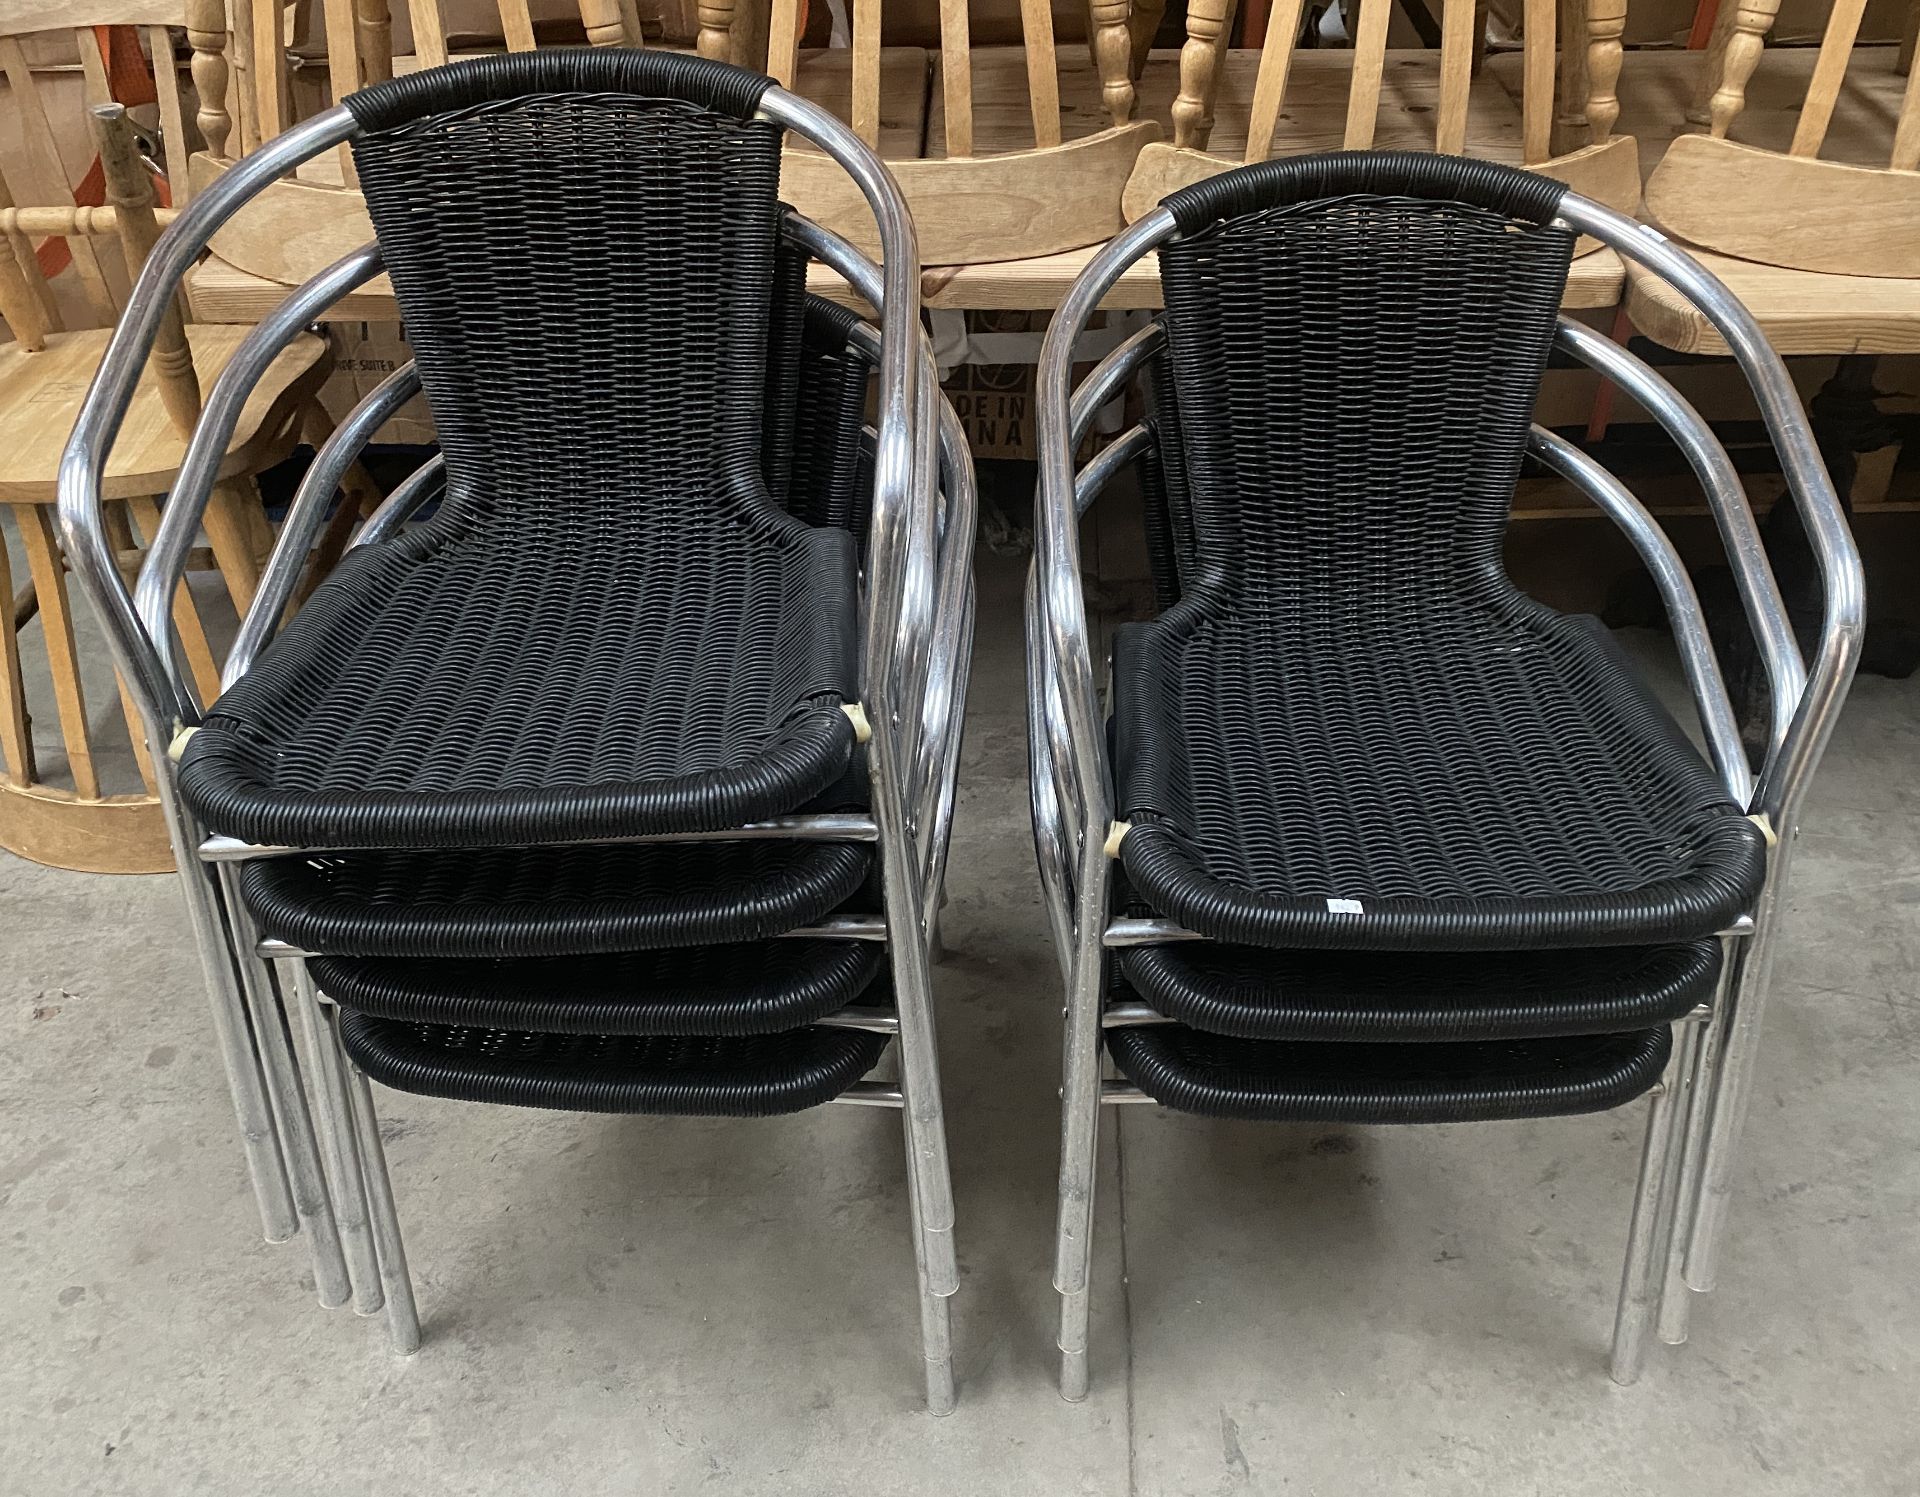 7 x Chrome Framed Stacking Outdoor Armchairs with Black Plastic Weave Seats